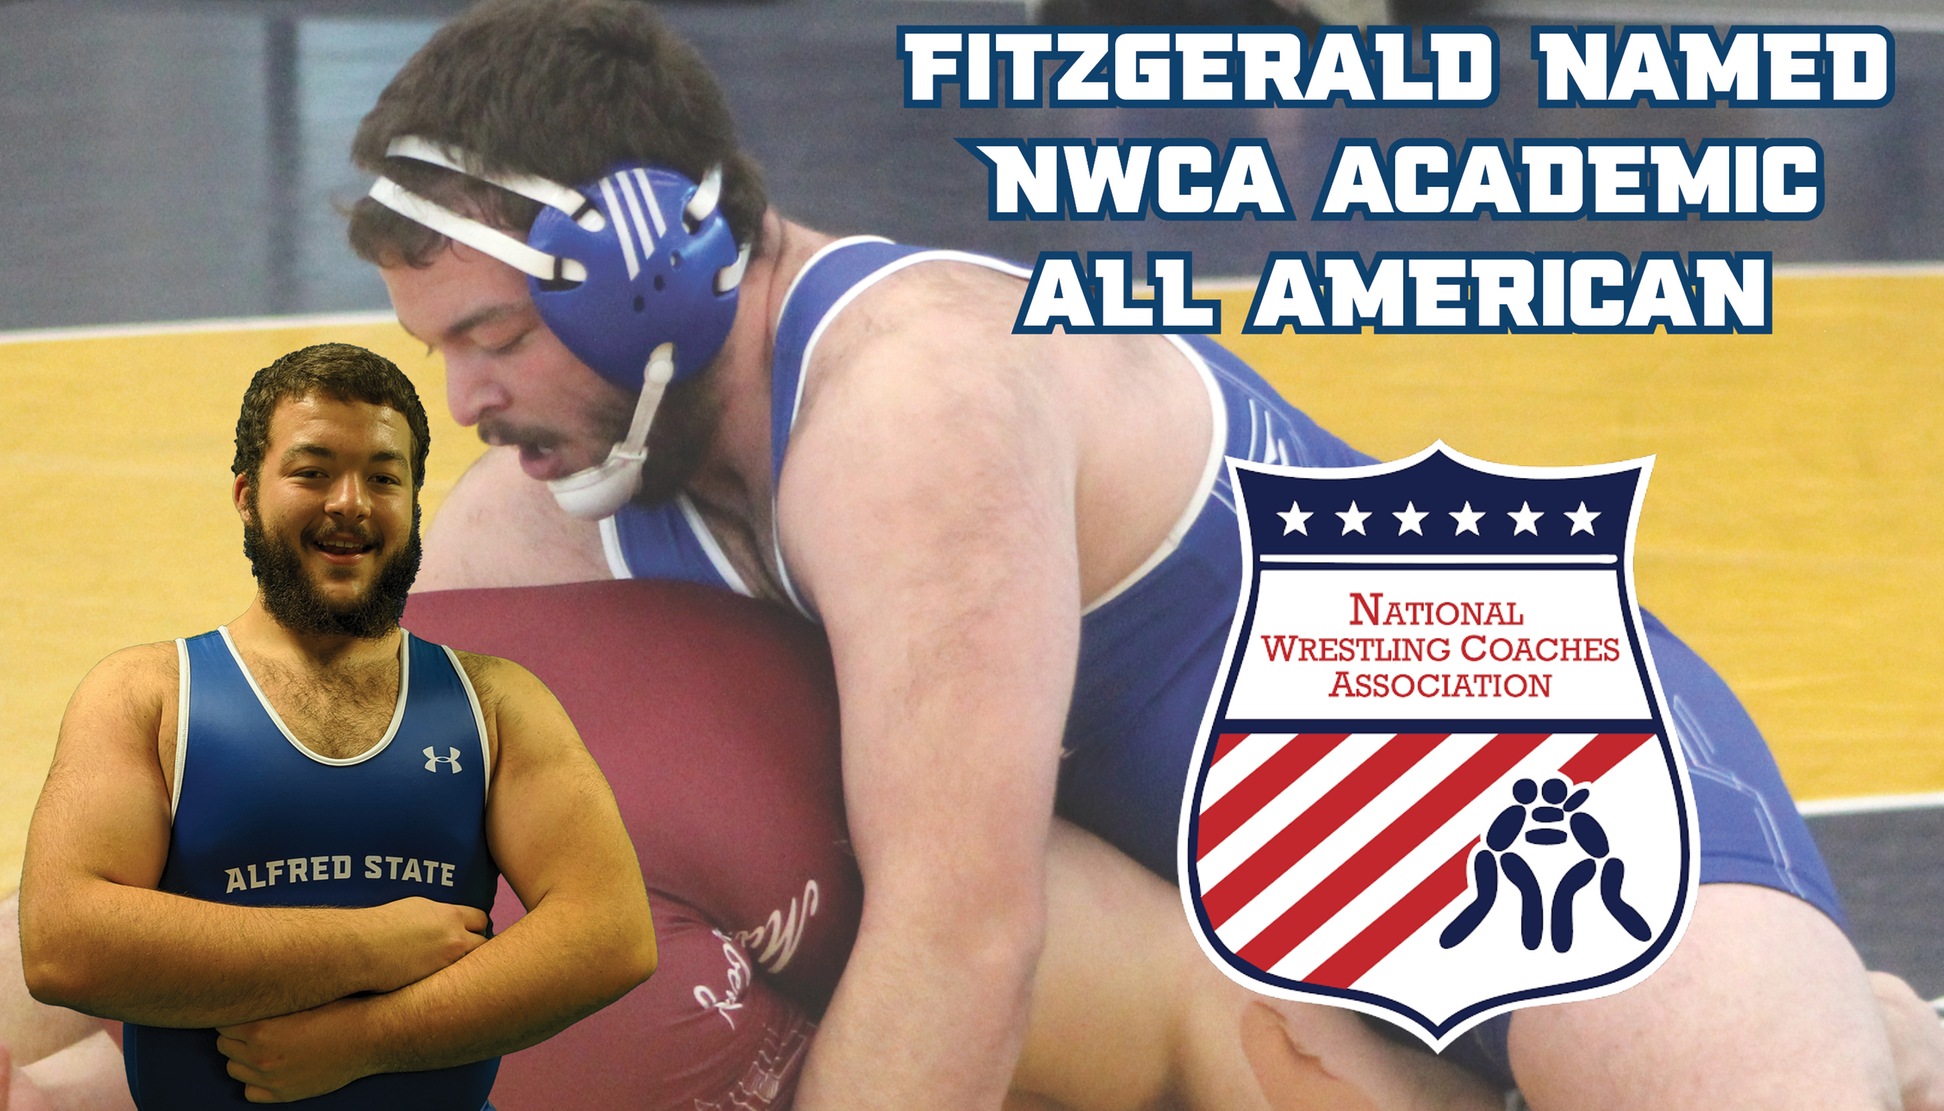 Kyle Fitzgerald named NWCA Academic All-American